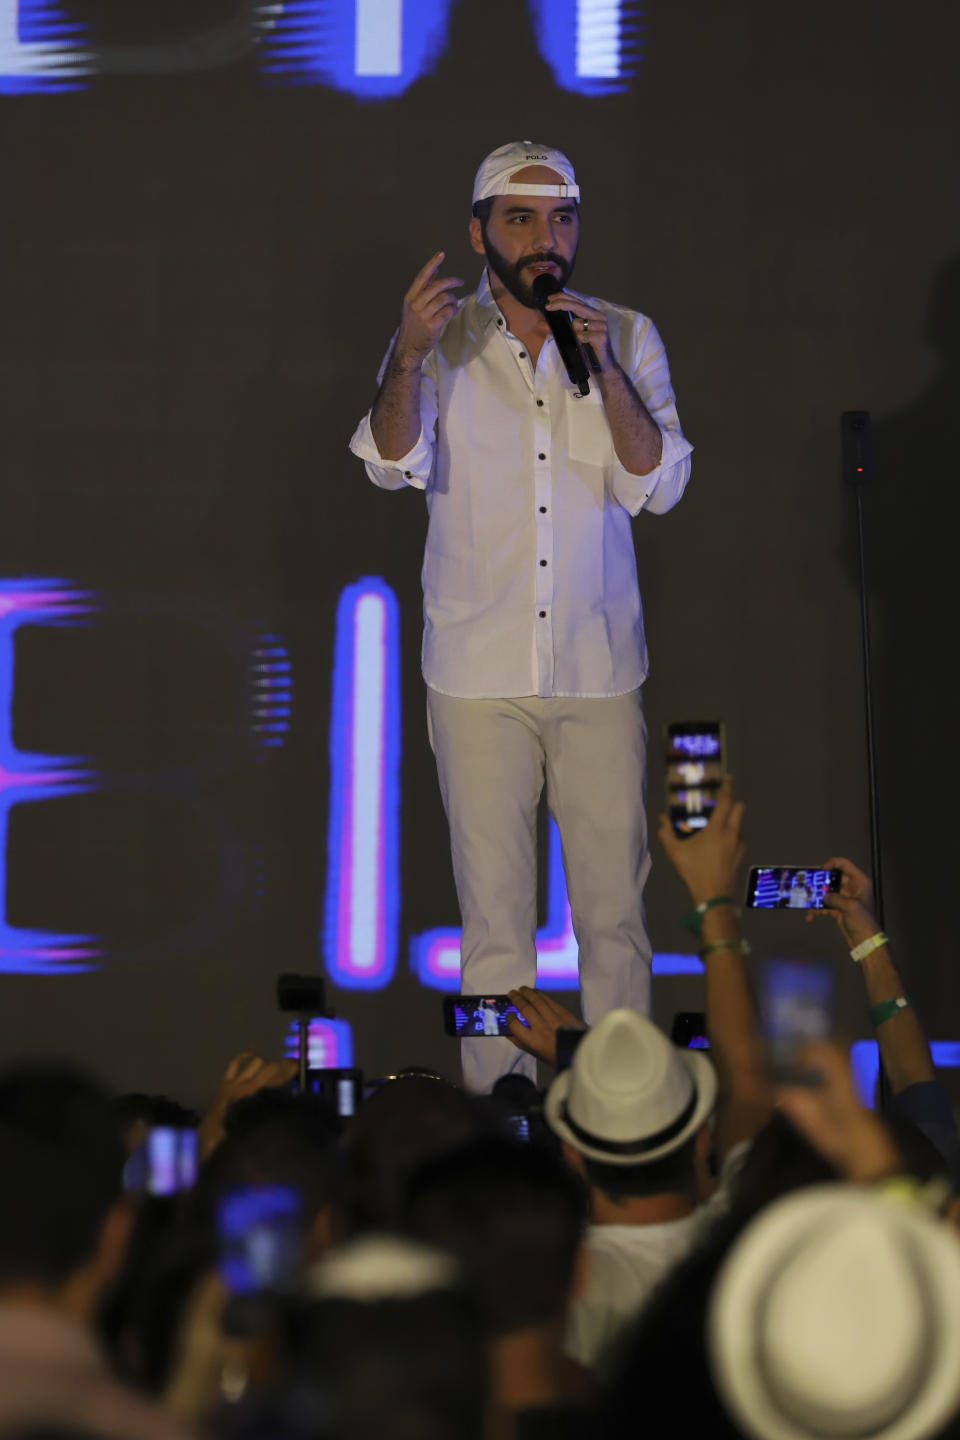 El Salvador's President Nayib Bukele participates in the closing ceremony of a congress for cryptocurrency investors in Santa Maria Mizata, El Salvador, Saturday, Nov. 20, 2021. Bukele announced during the rock concert-like atmosphere at the gathering that his government will build an oceanside "Bitcoin City" at the base of a volcano. (AP Photo/Salvador Melendez)